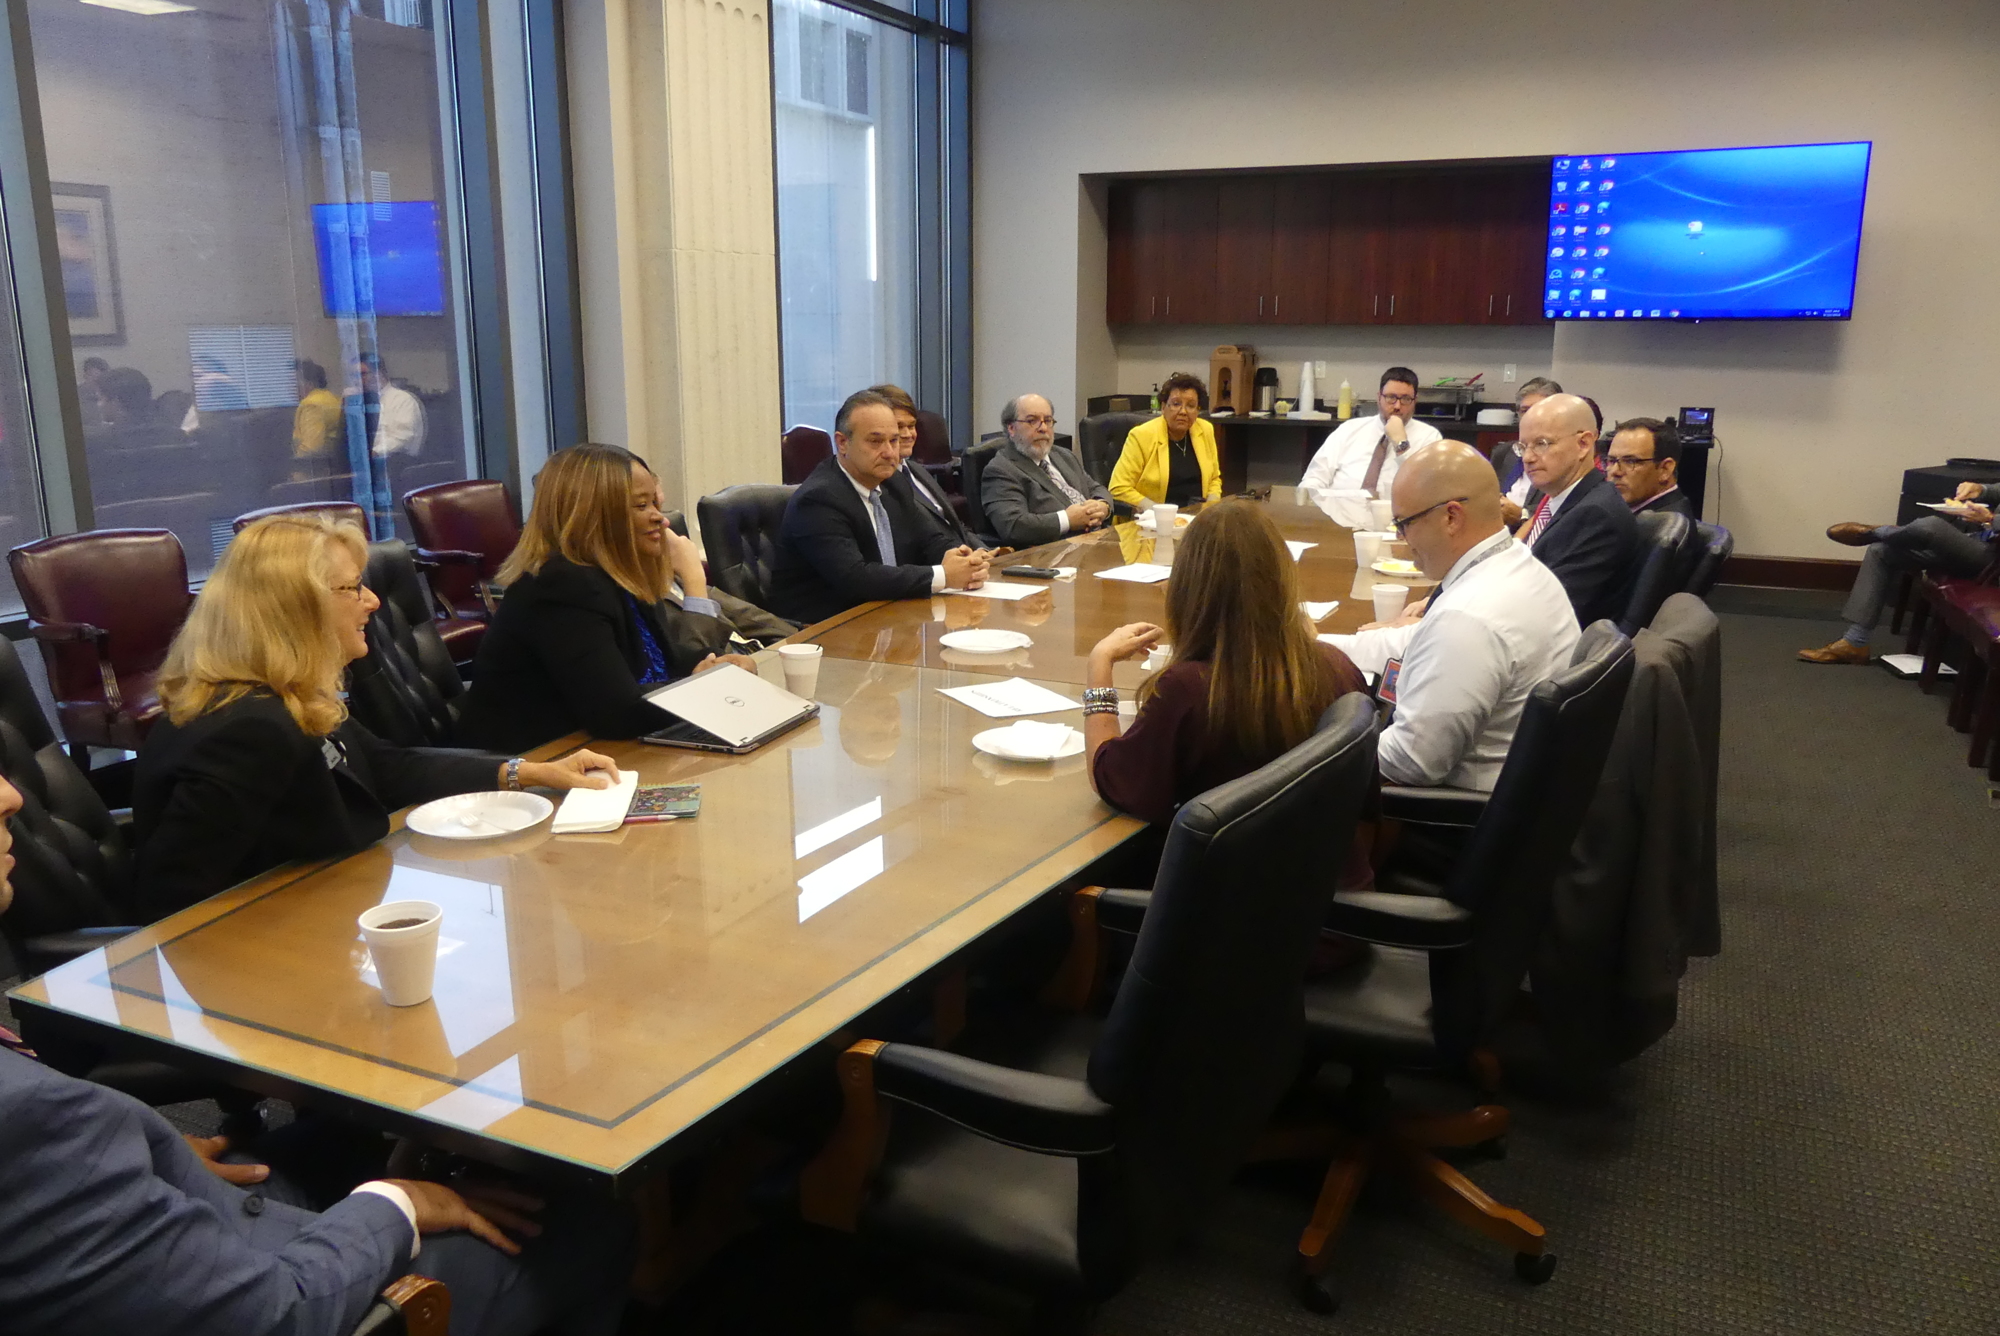 The Jacksonville Bar Association Professionalism and Mentoring Committee hosts a breakfast with a roundtable discussion every other month at the Duval County Courthouse.